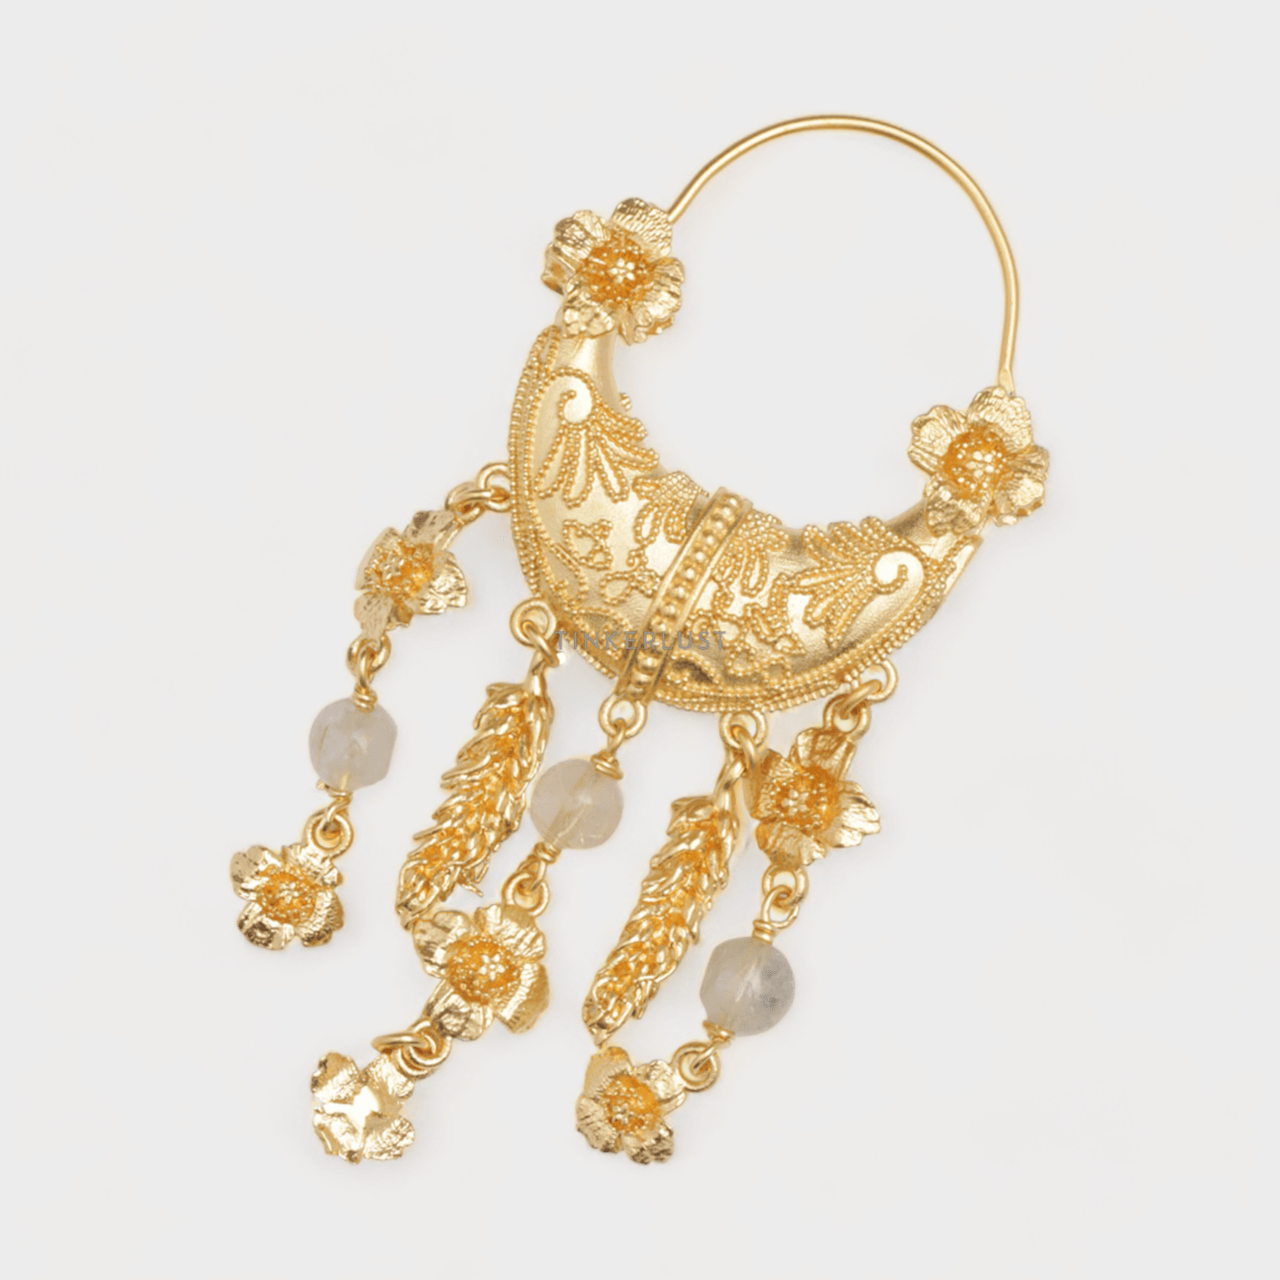 Christian Dior Mille Fleurs De Dior Earring in Gold-Finish Metal with Transparent Glass Beads Jewellery